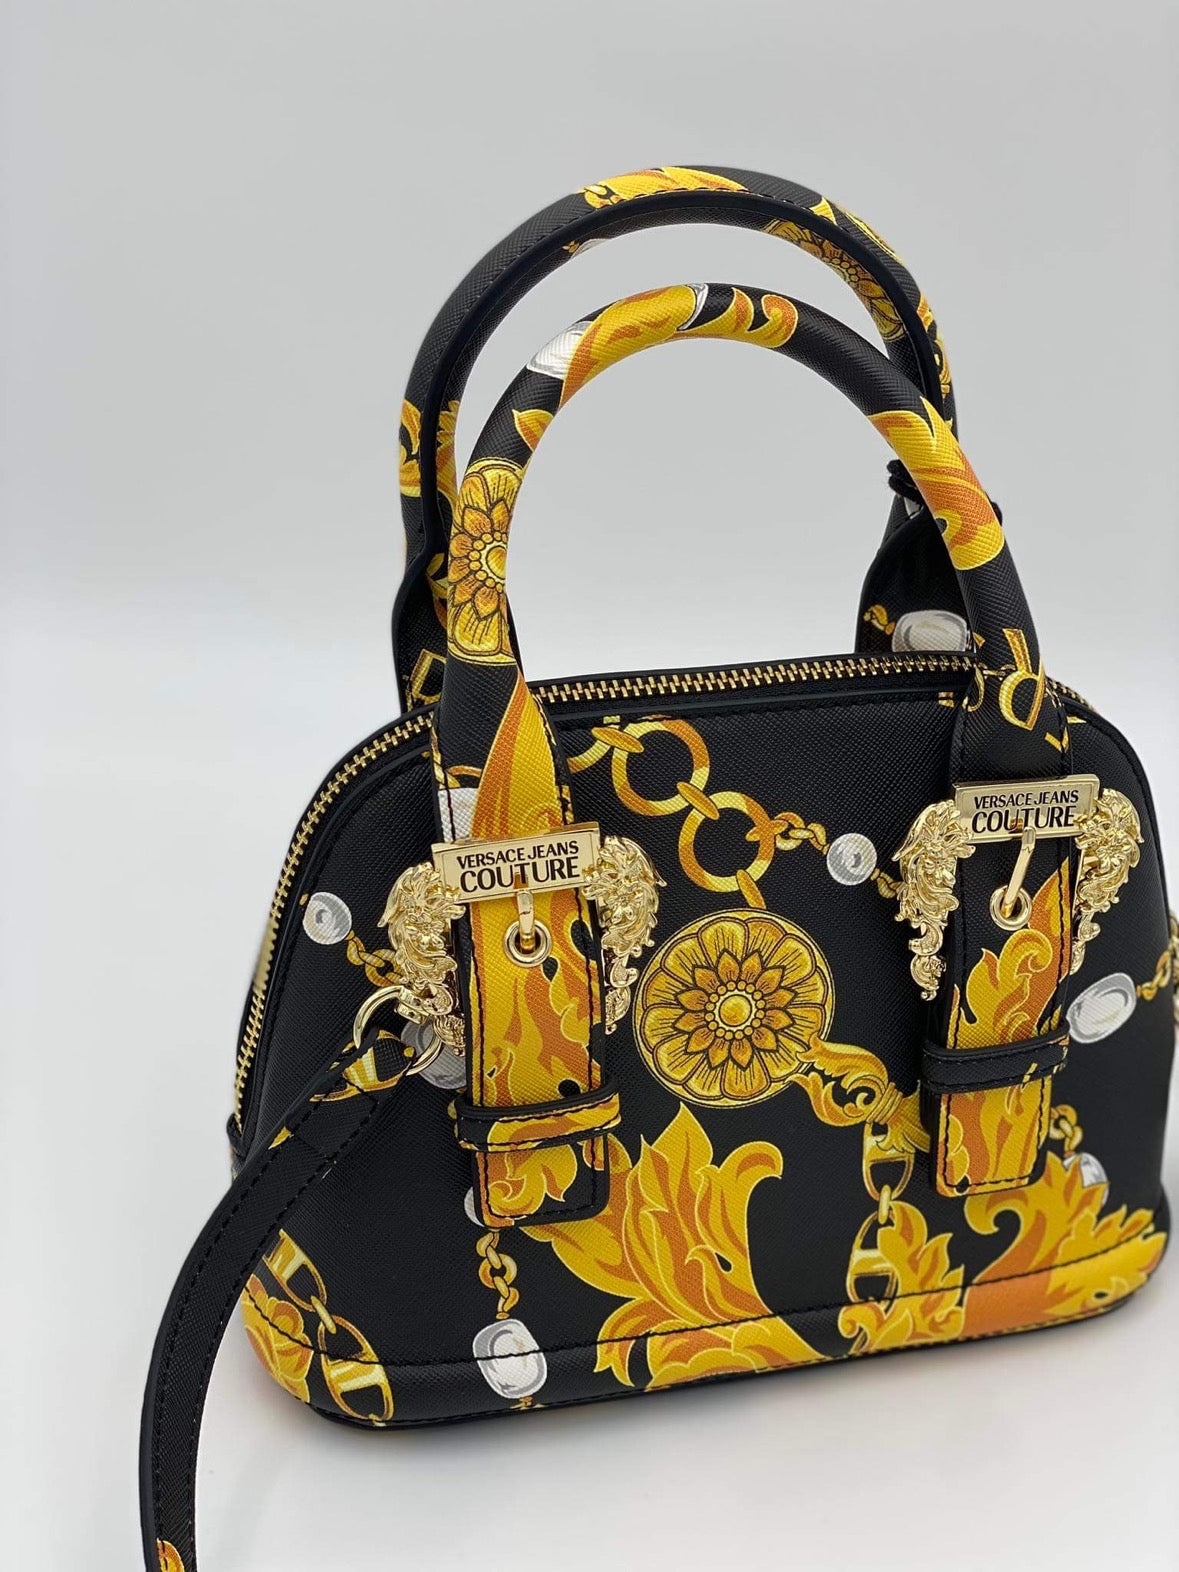 Chain Couture printed shoulder bag